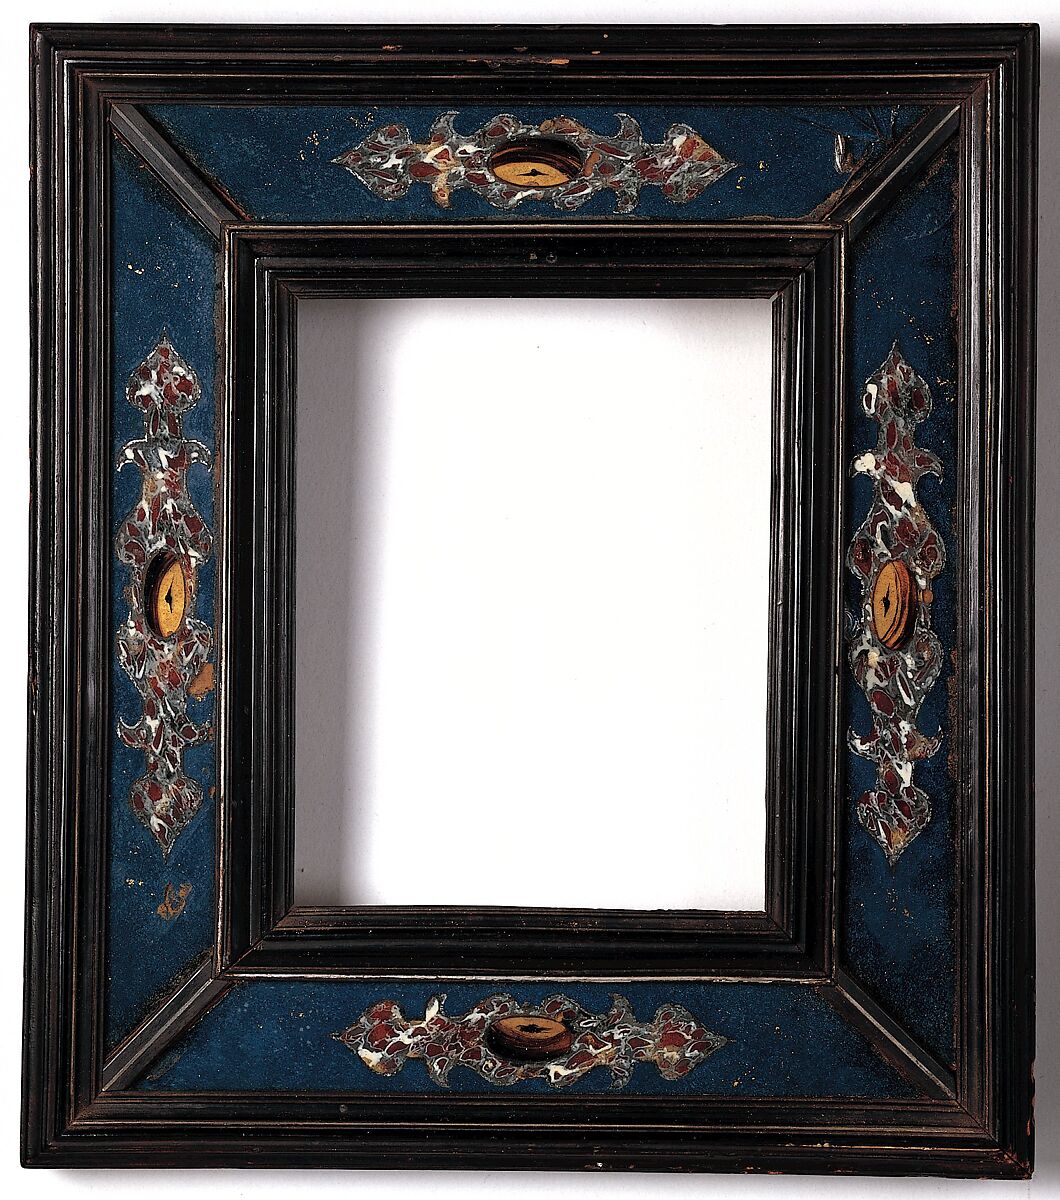 Cassetta frame (pair with 1975.1.2169), Poplar back frame with ebony and ebonized pearwood upper moldings; glass; pewter; silver wire., Italian, Rome 